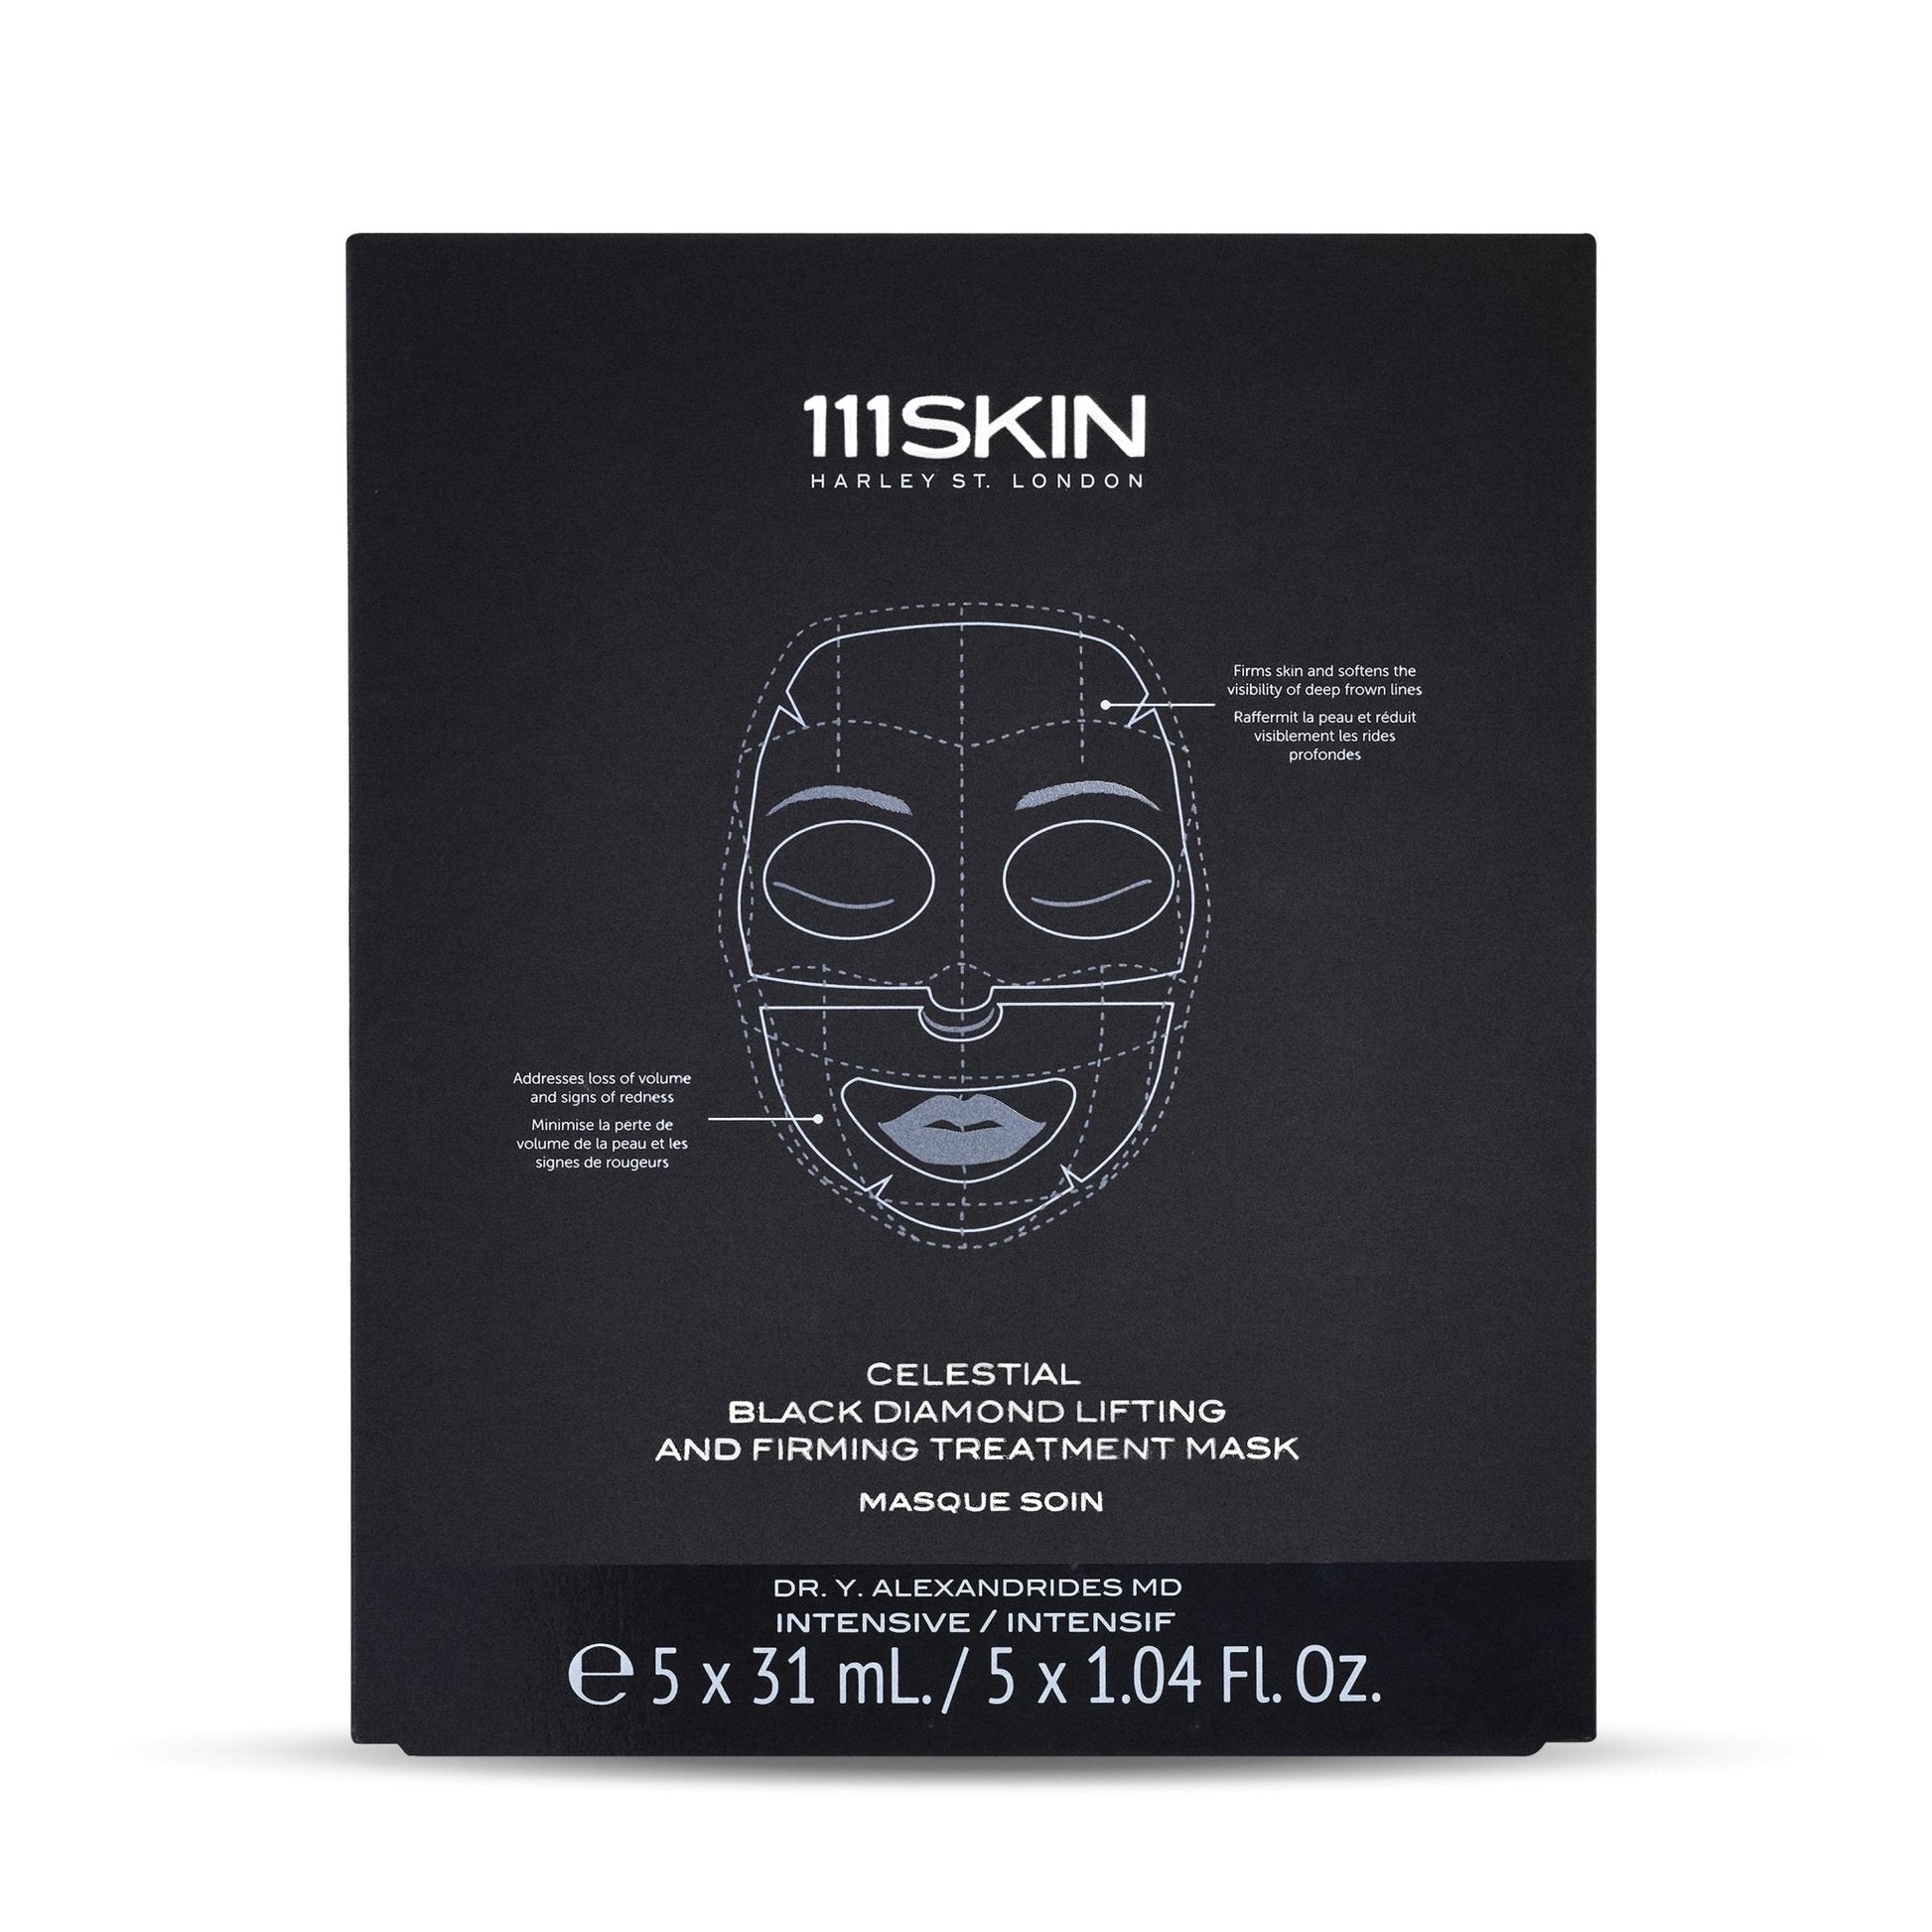 Celestial Black Diamond Lifting And Firming Face Mask - 111SKIN